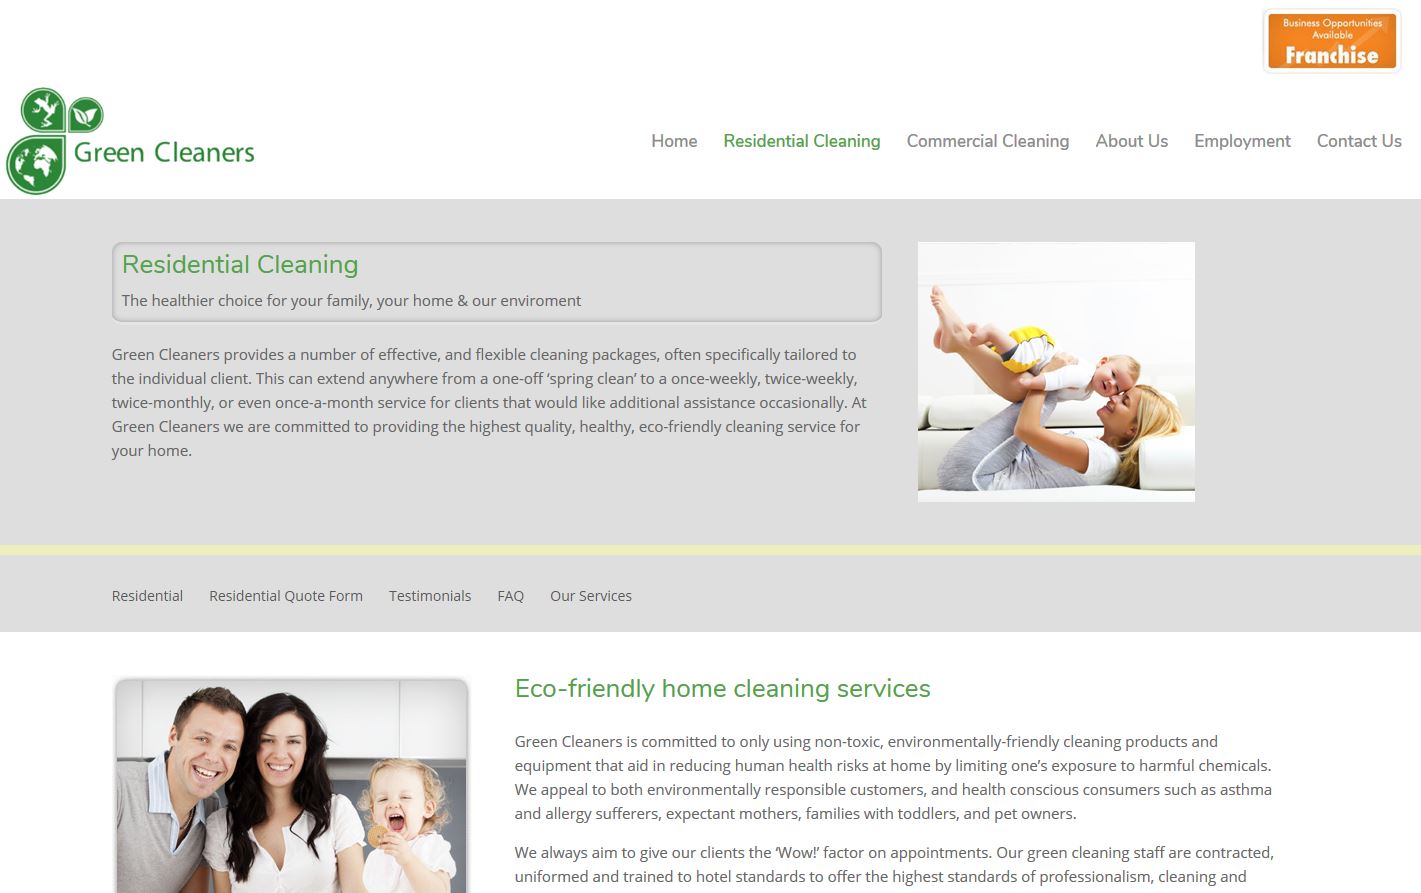 Website build for Green Cleaners